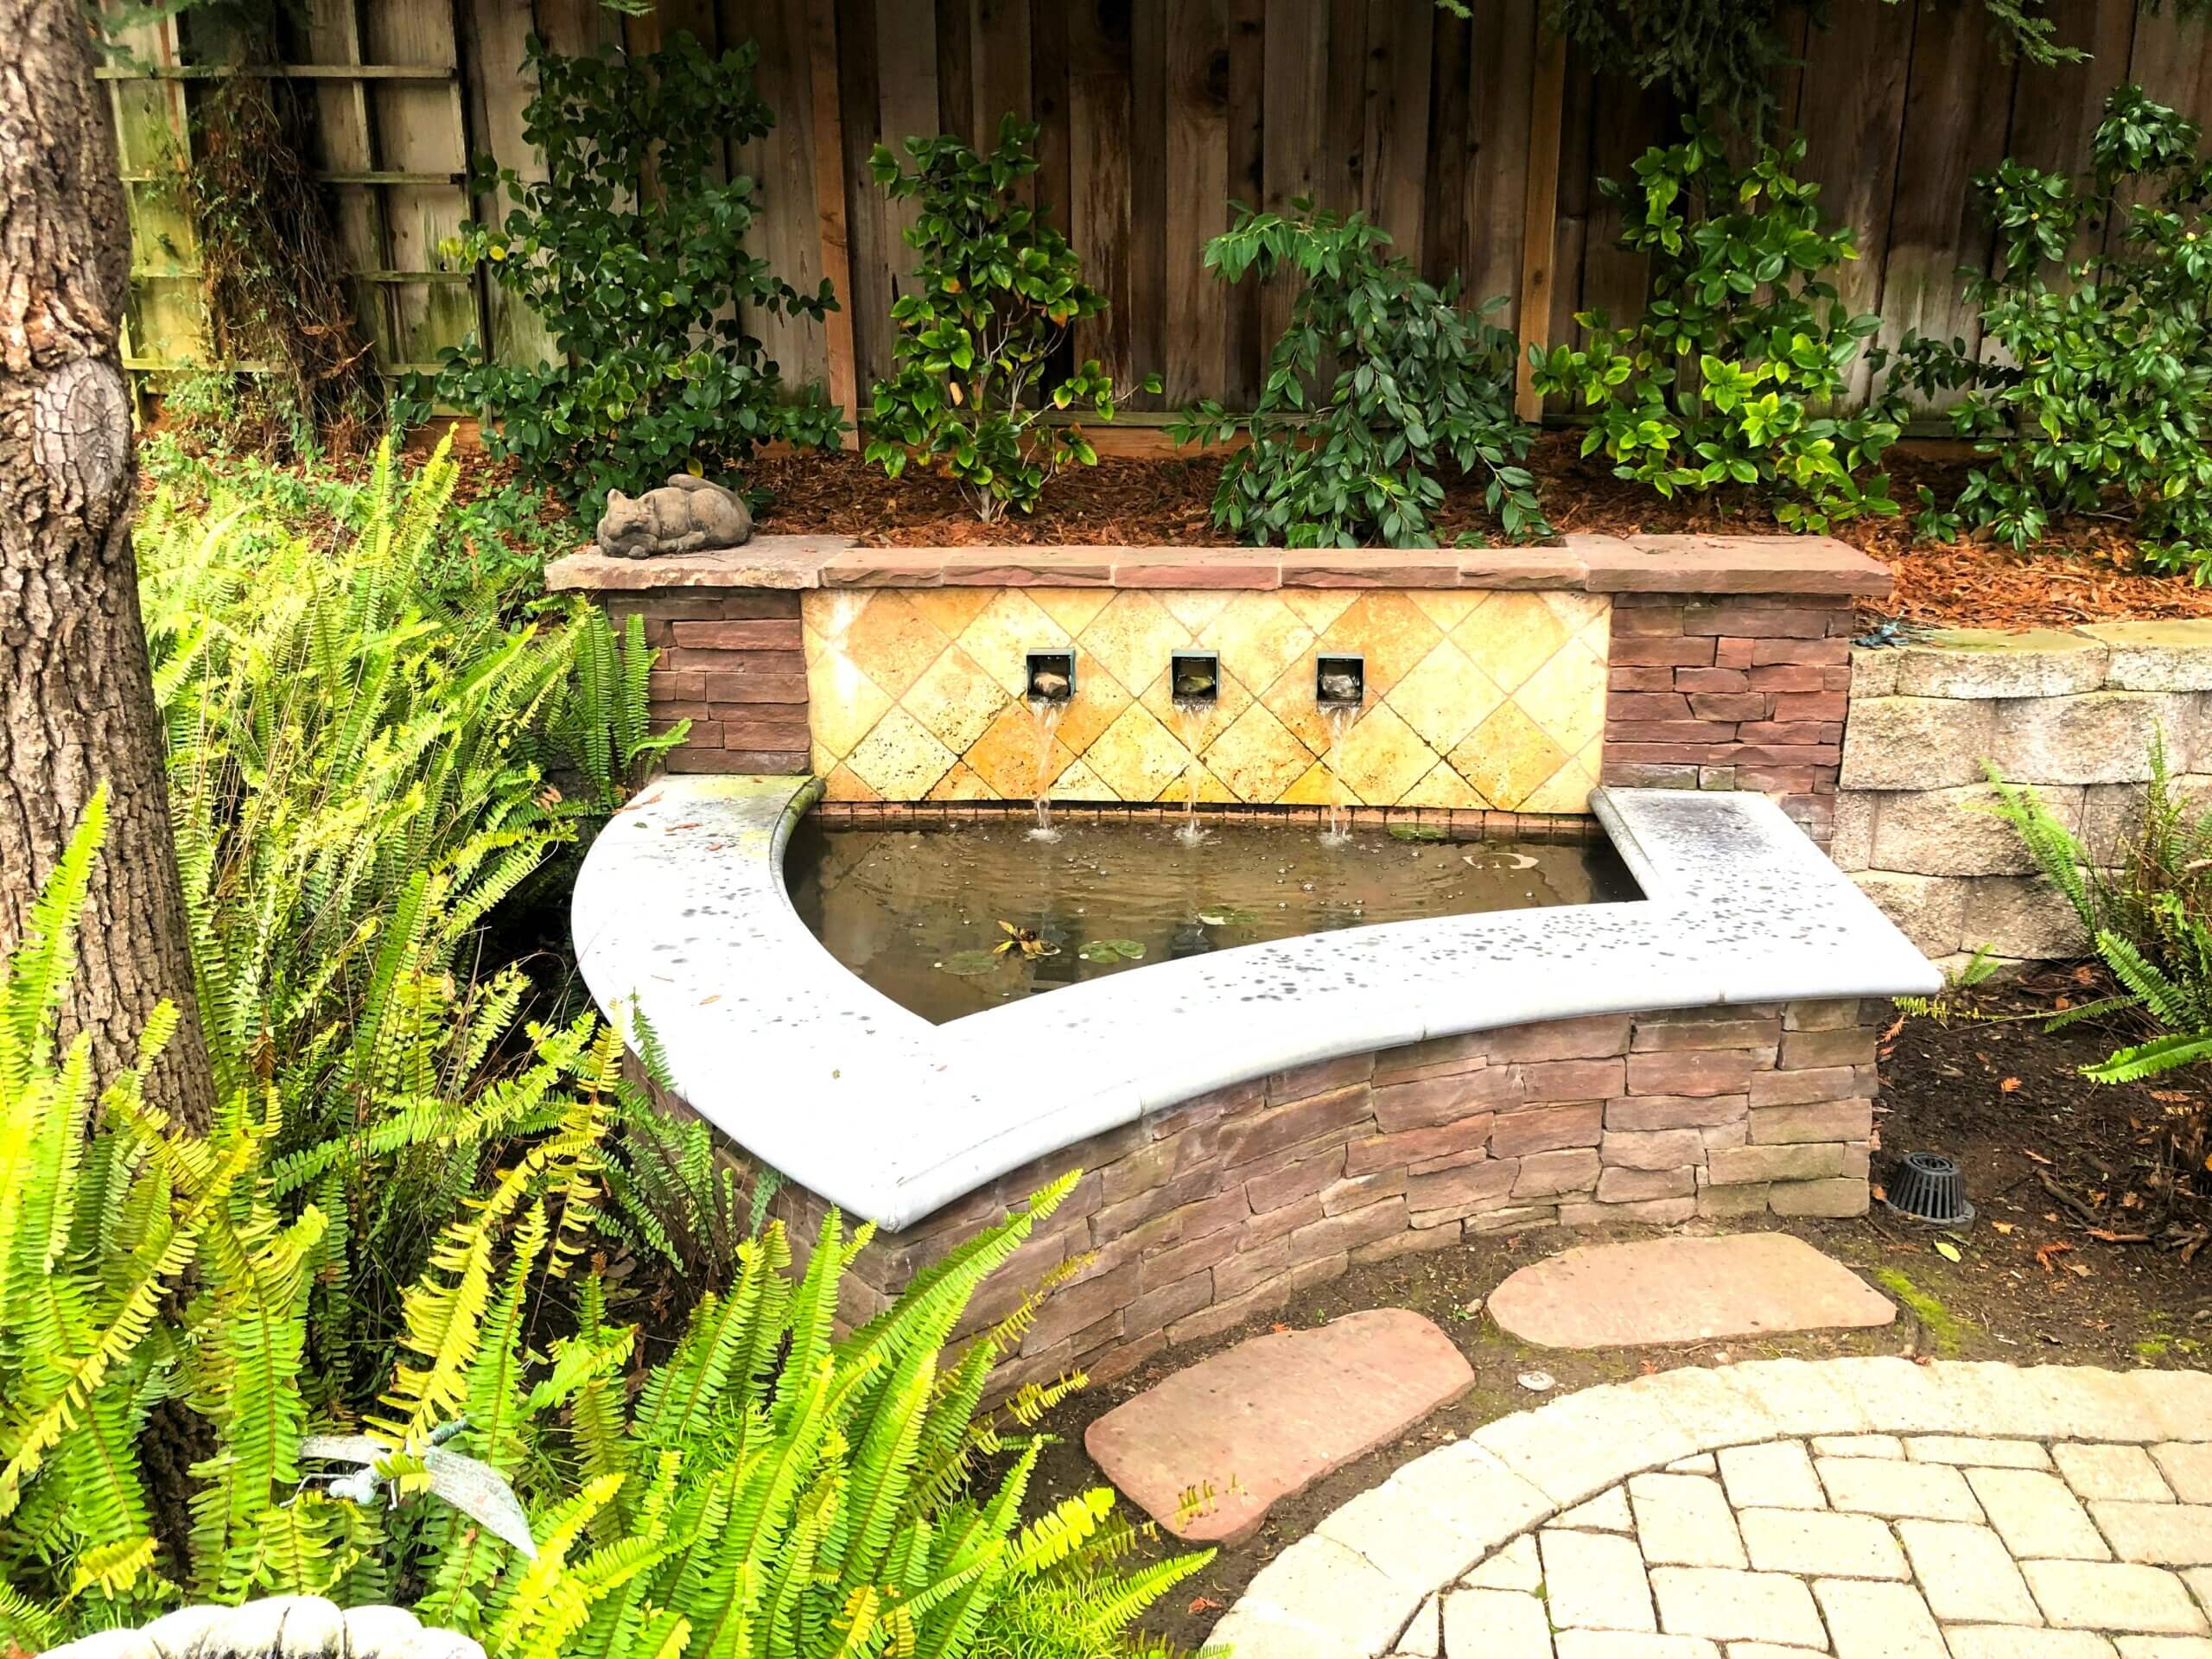 Stone water feature in backyard with three fountains